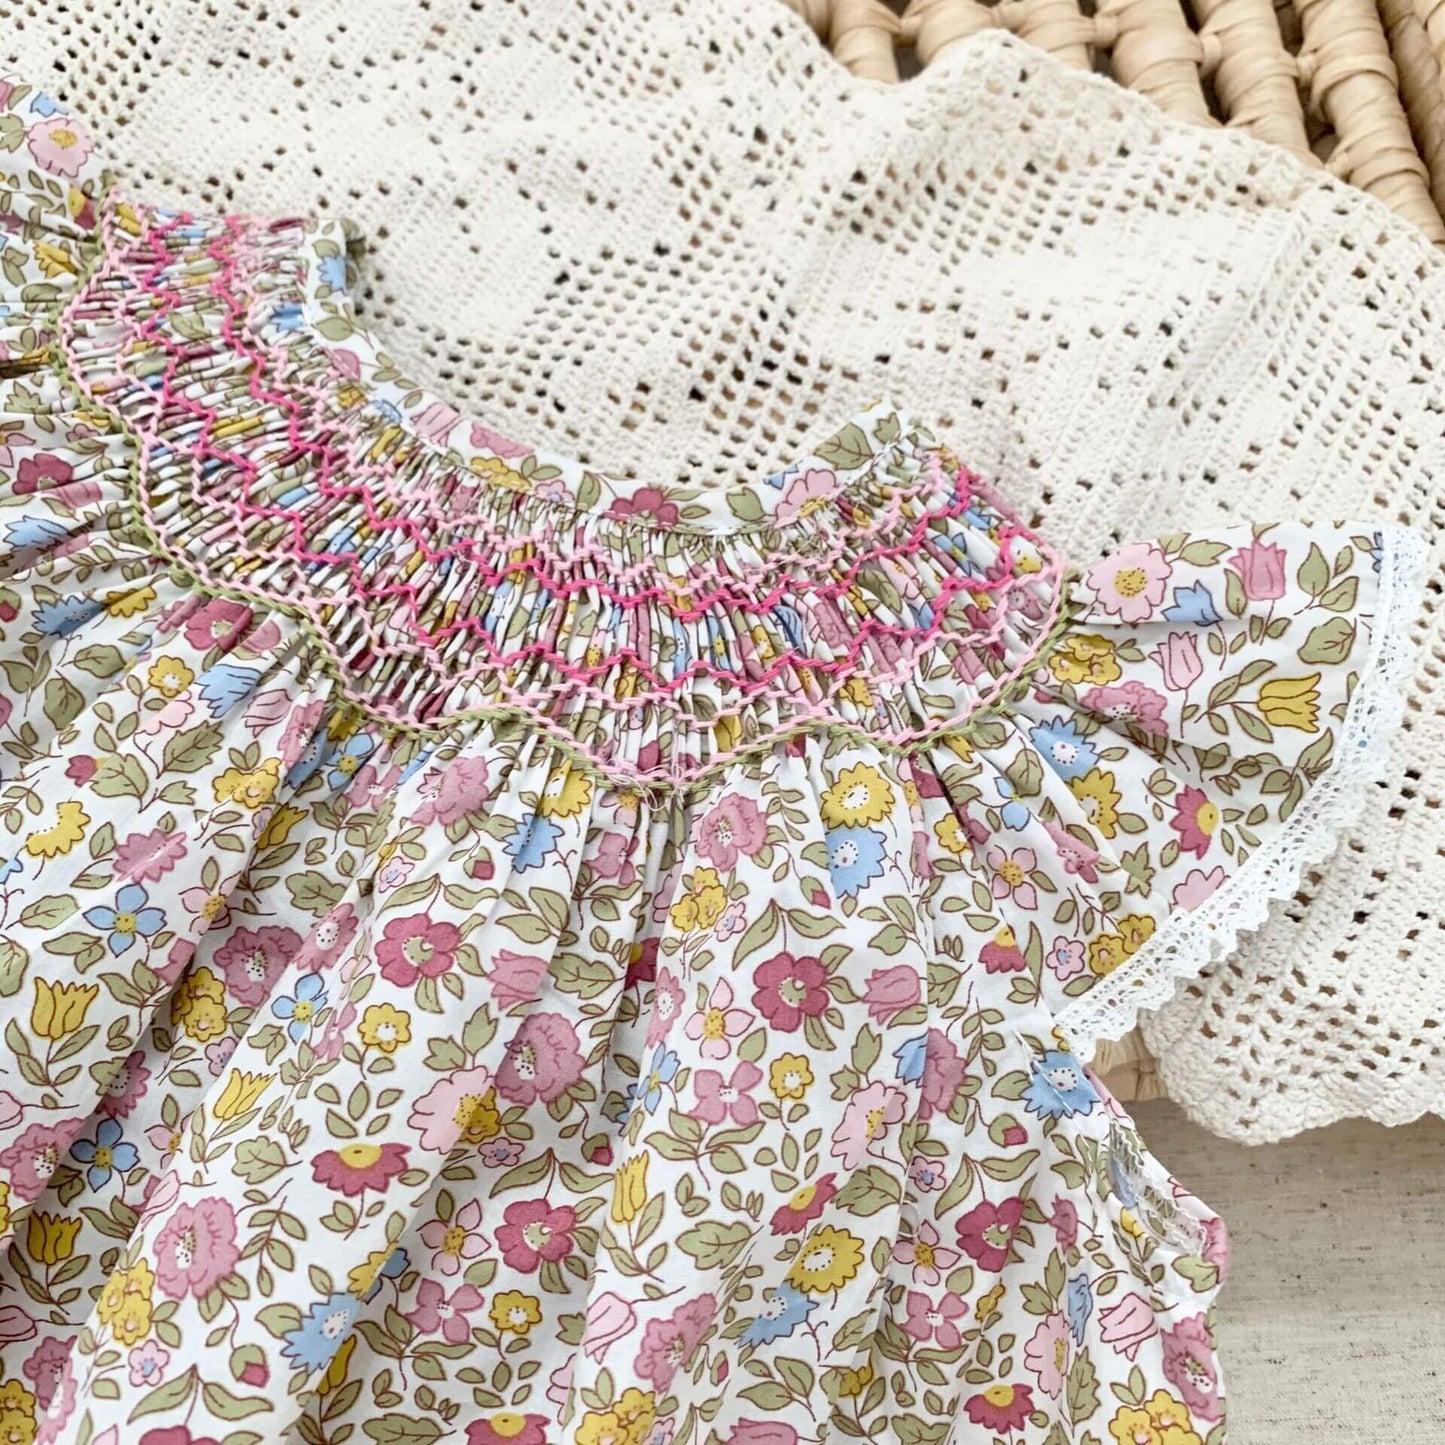 Cute Smocked Bishops,White/Floral,2T to 6T.